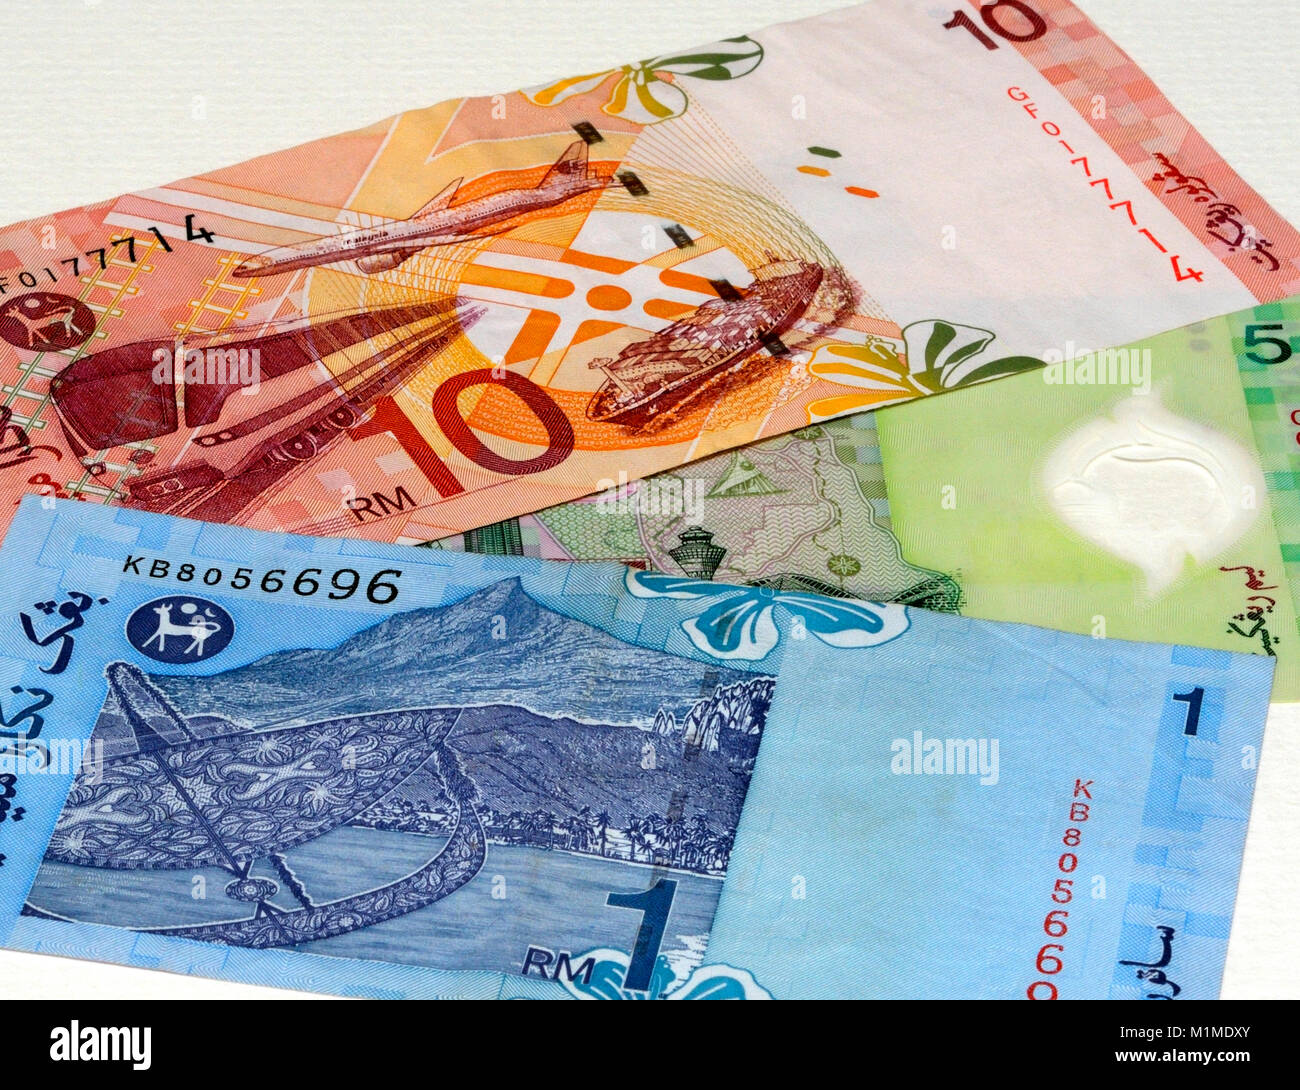 Malaysia Currency Bank Notes Stock Photo